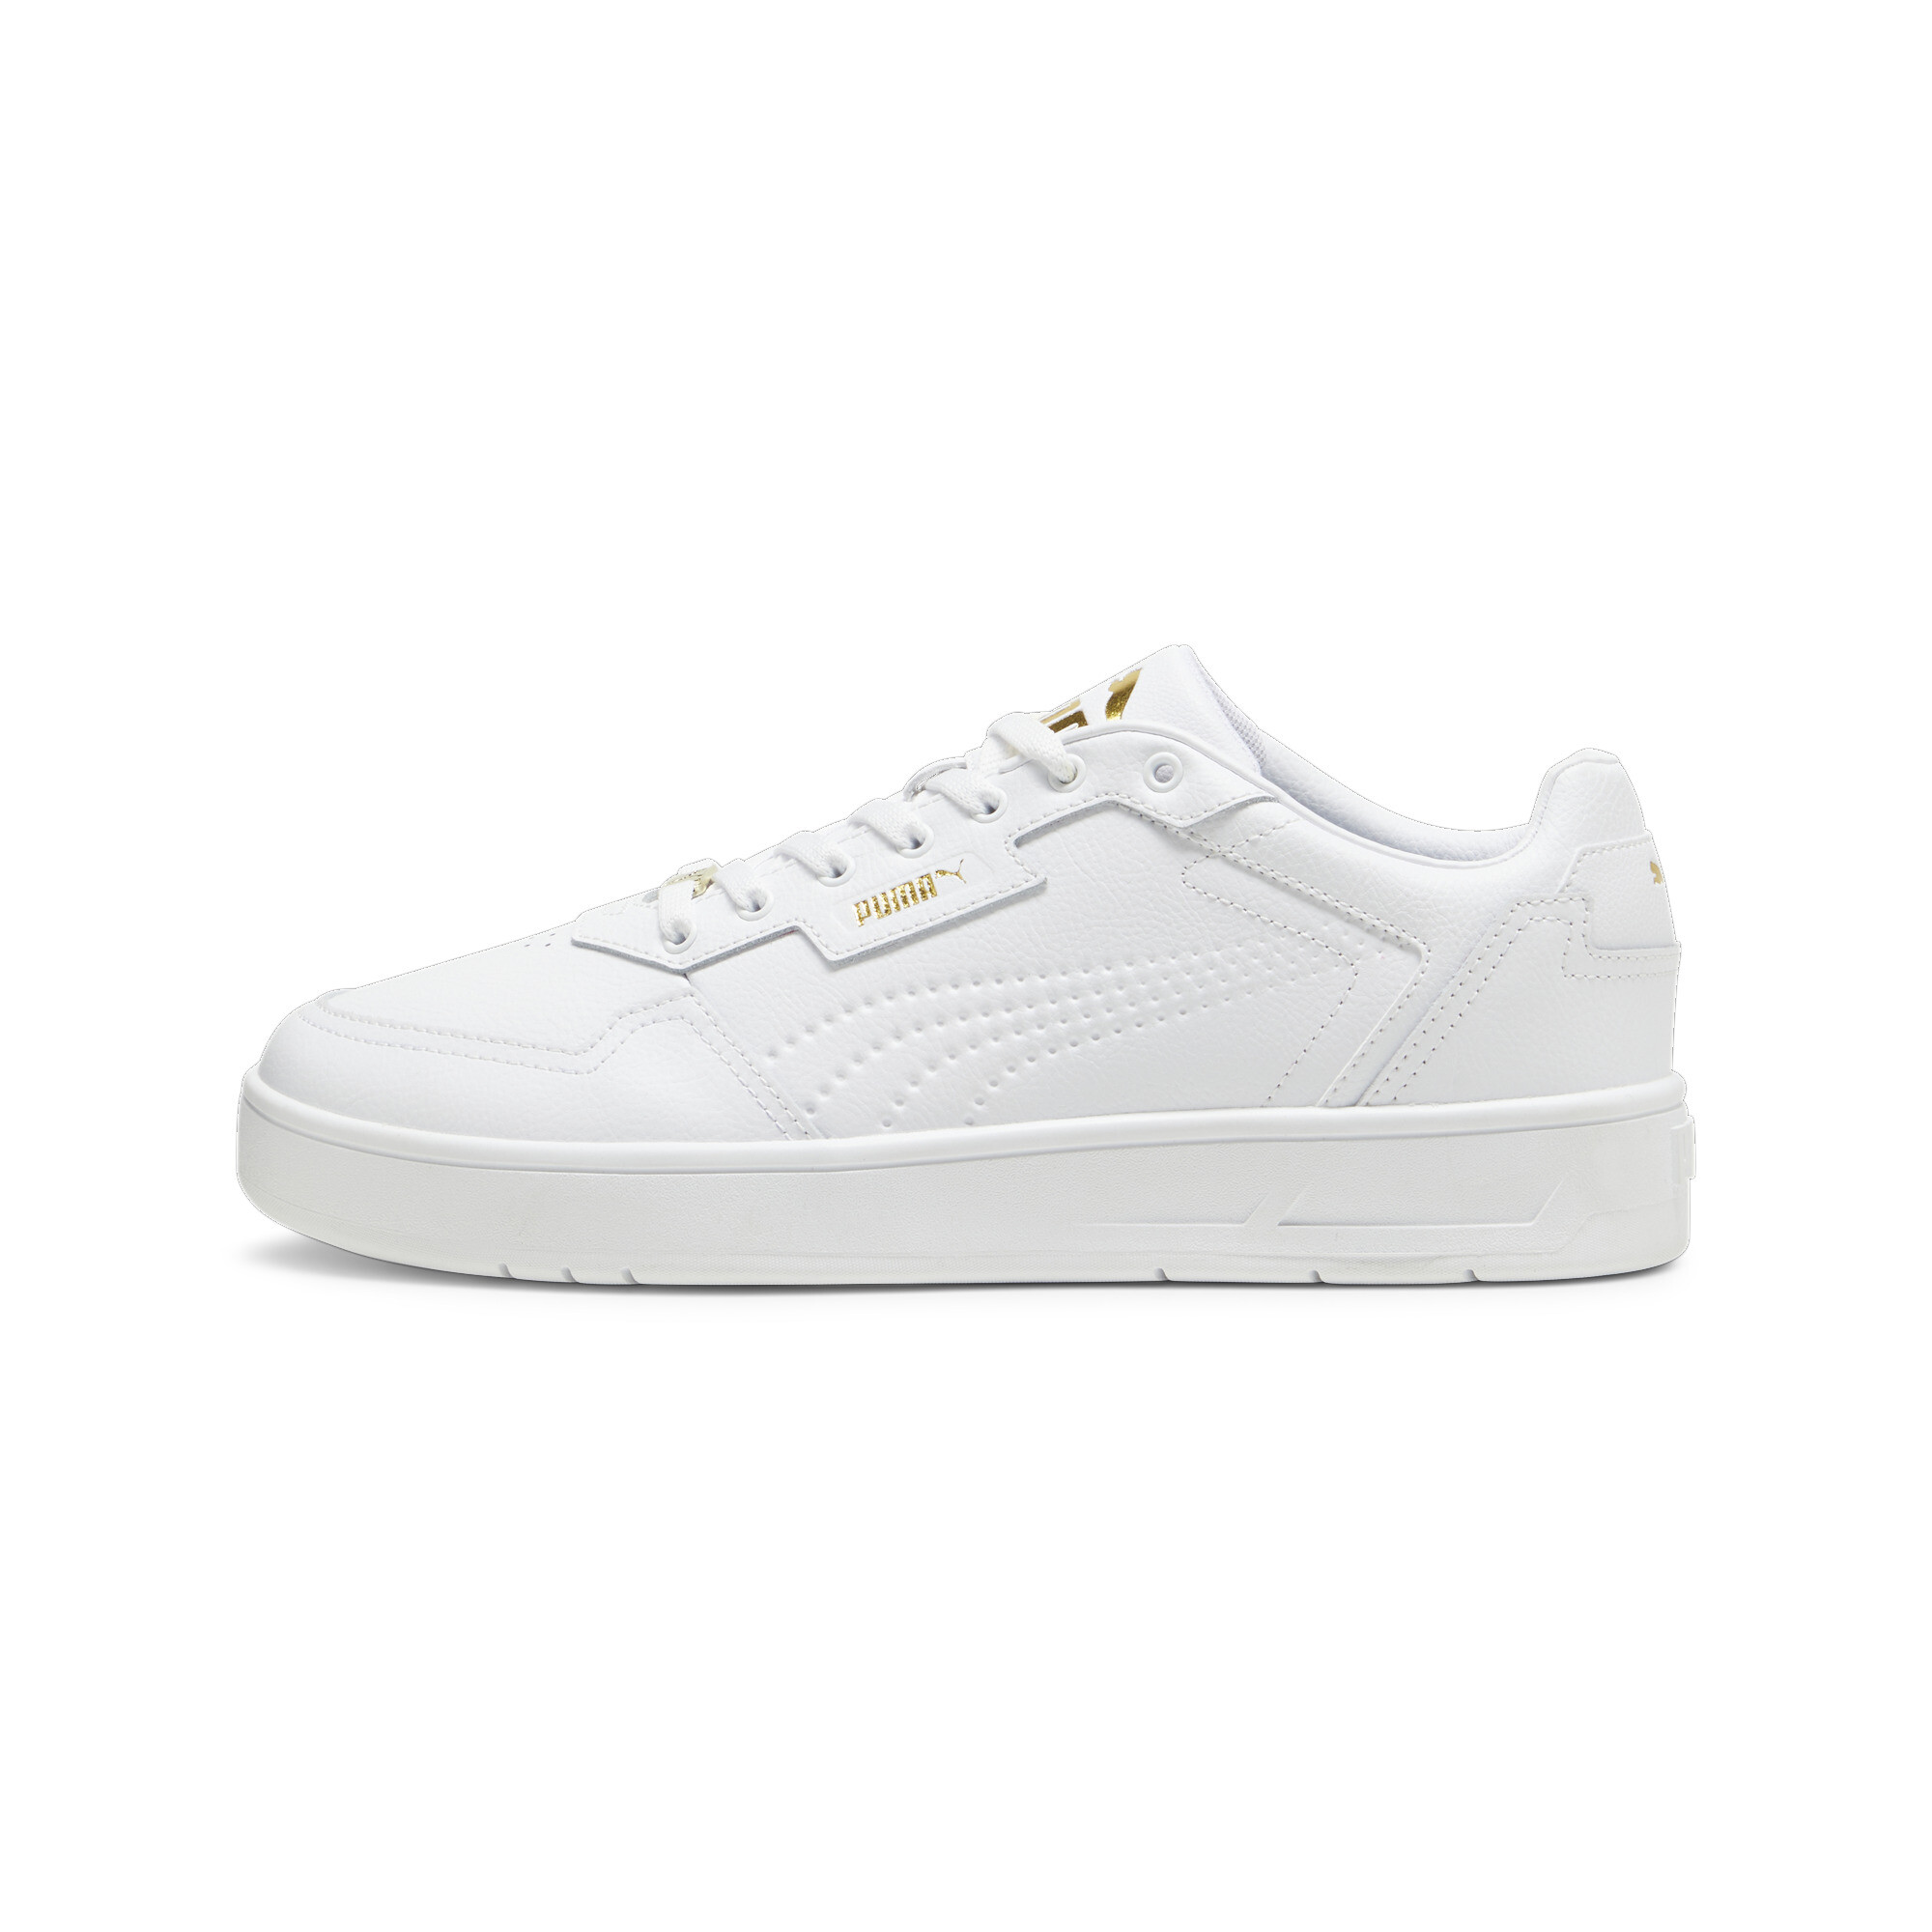 Puma Court Classic Lux Sneakers, White, Size 44.5, Shoes